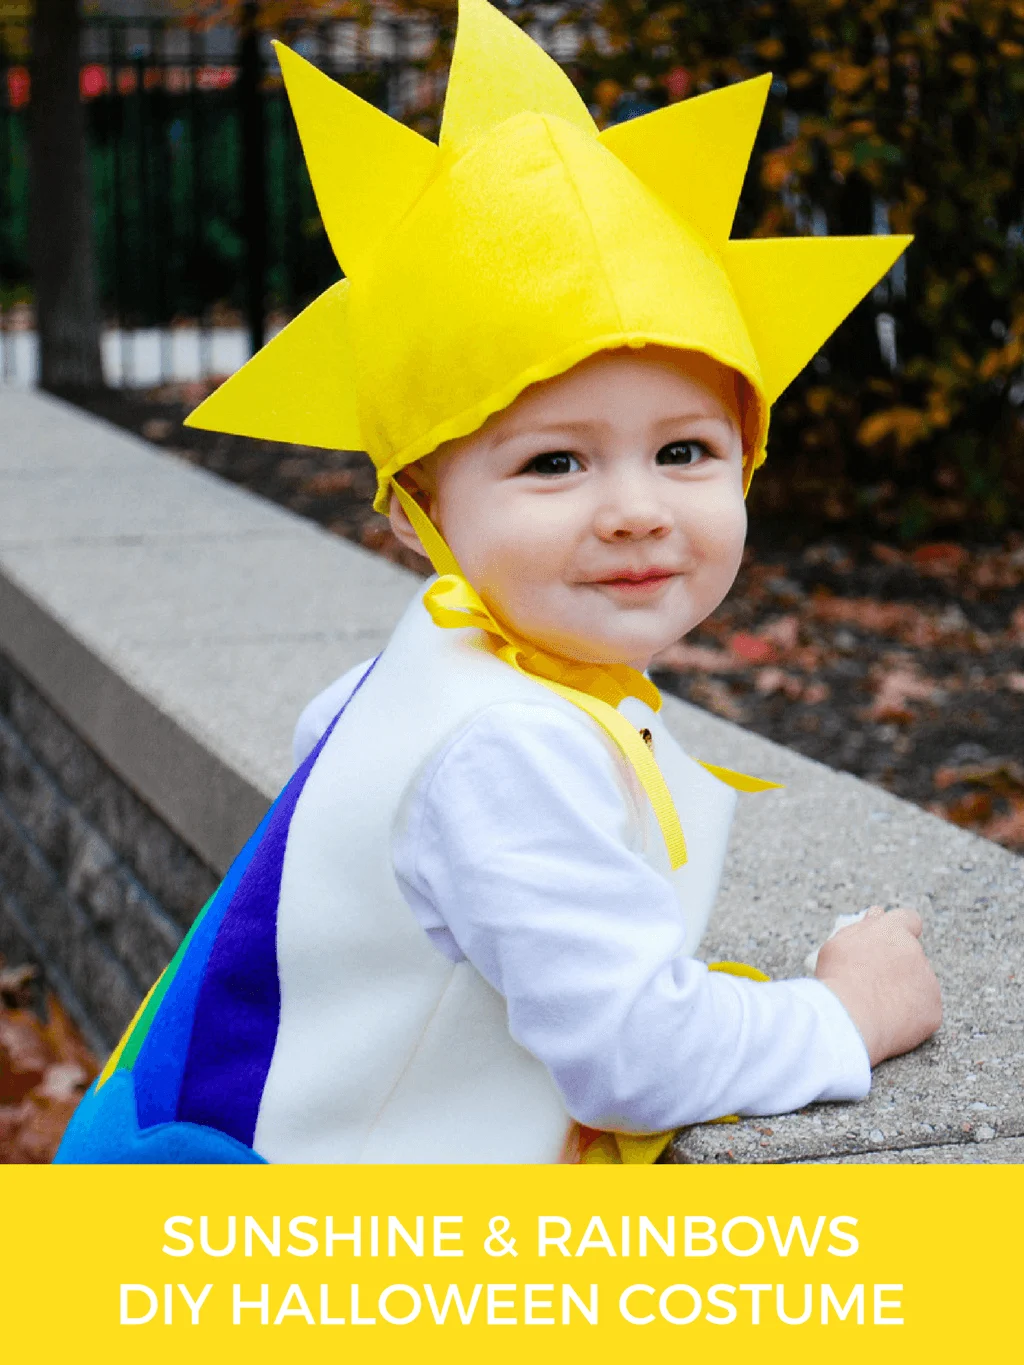 Sunshine and Rainbows DIY Halloween costume idea for toddlers and